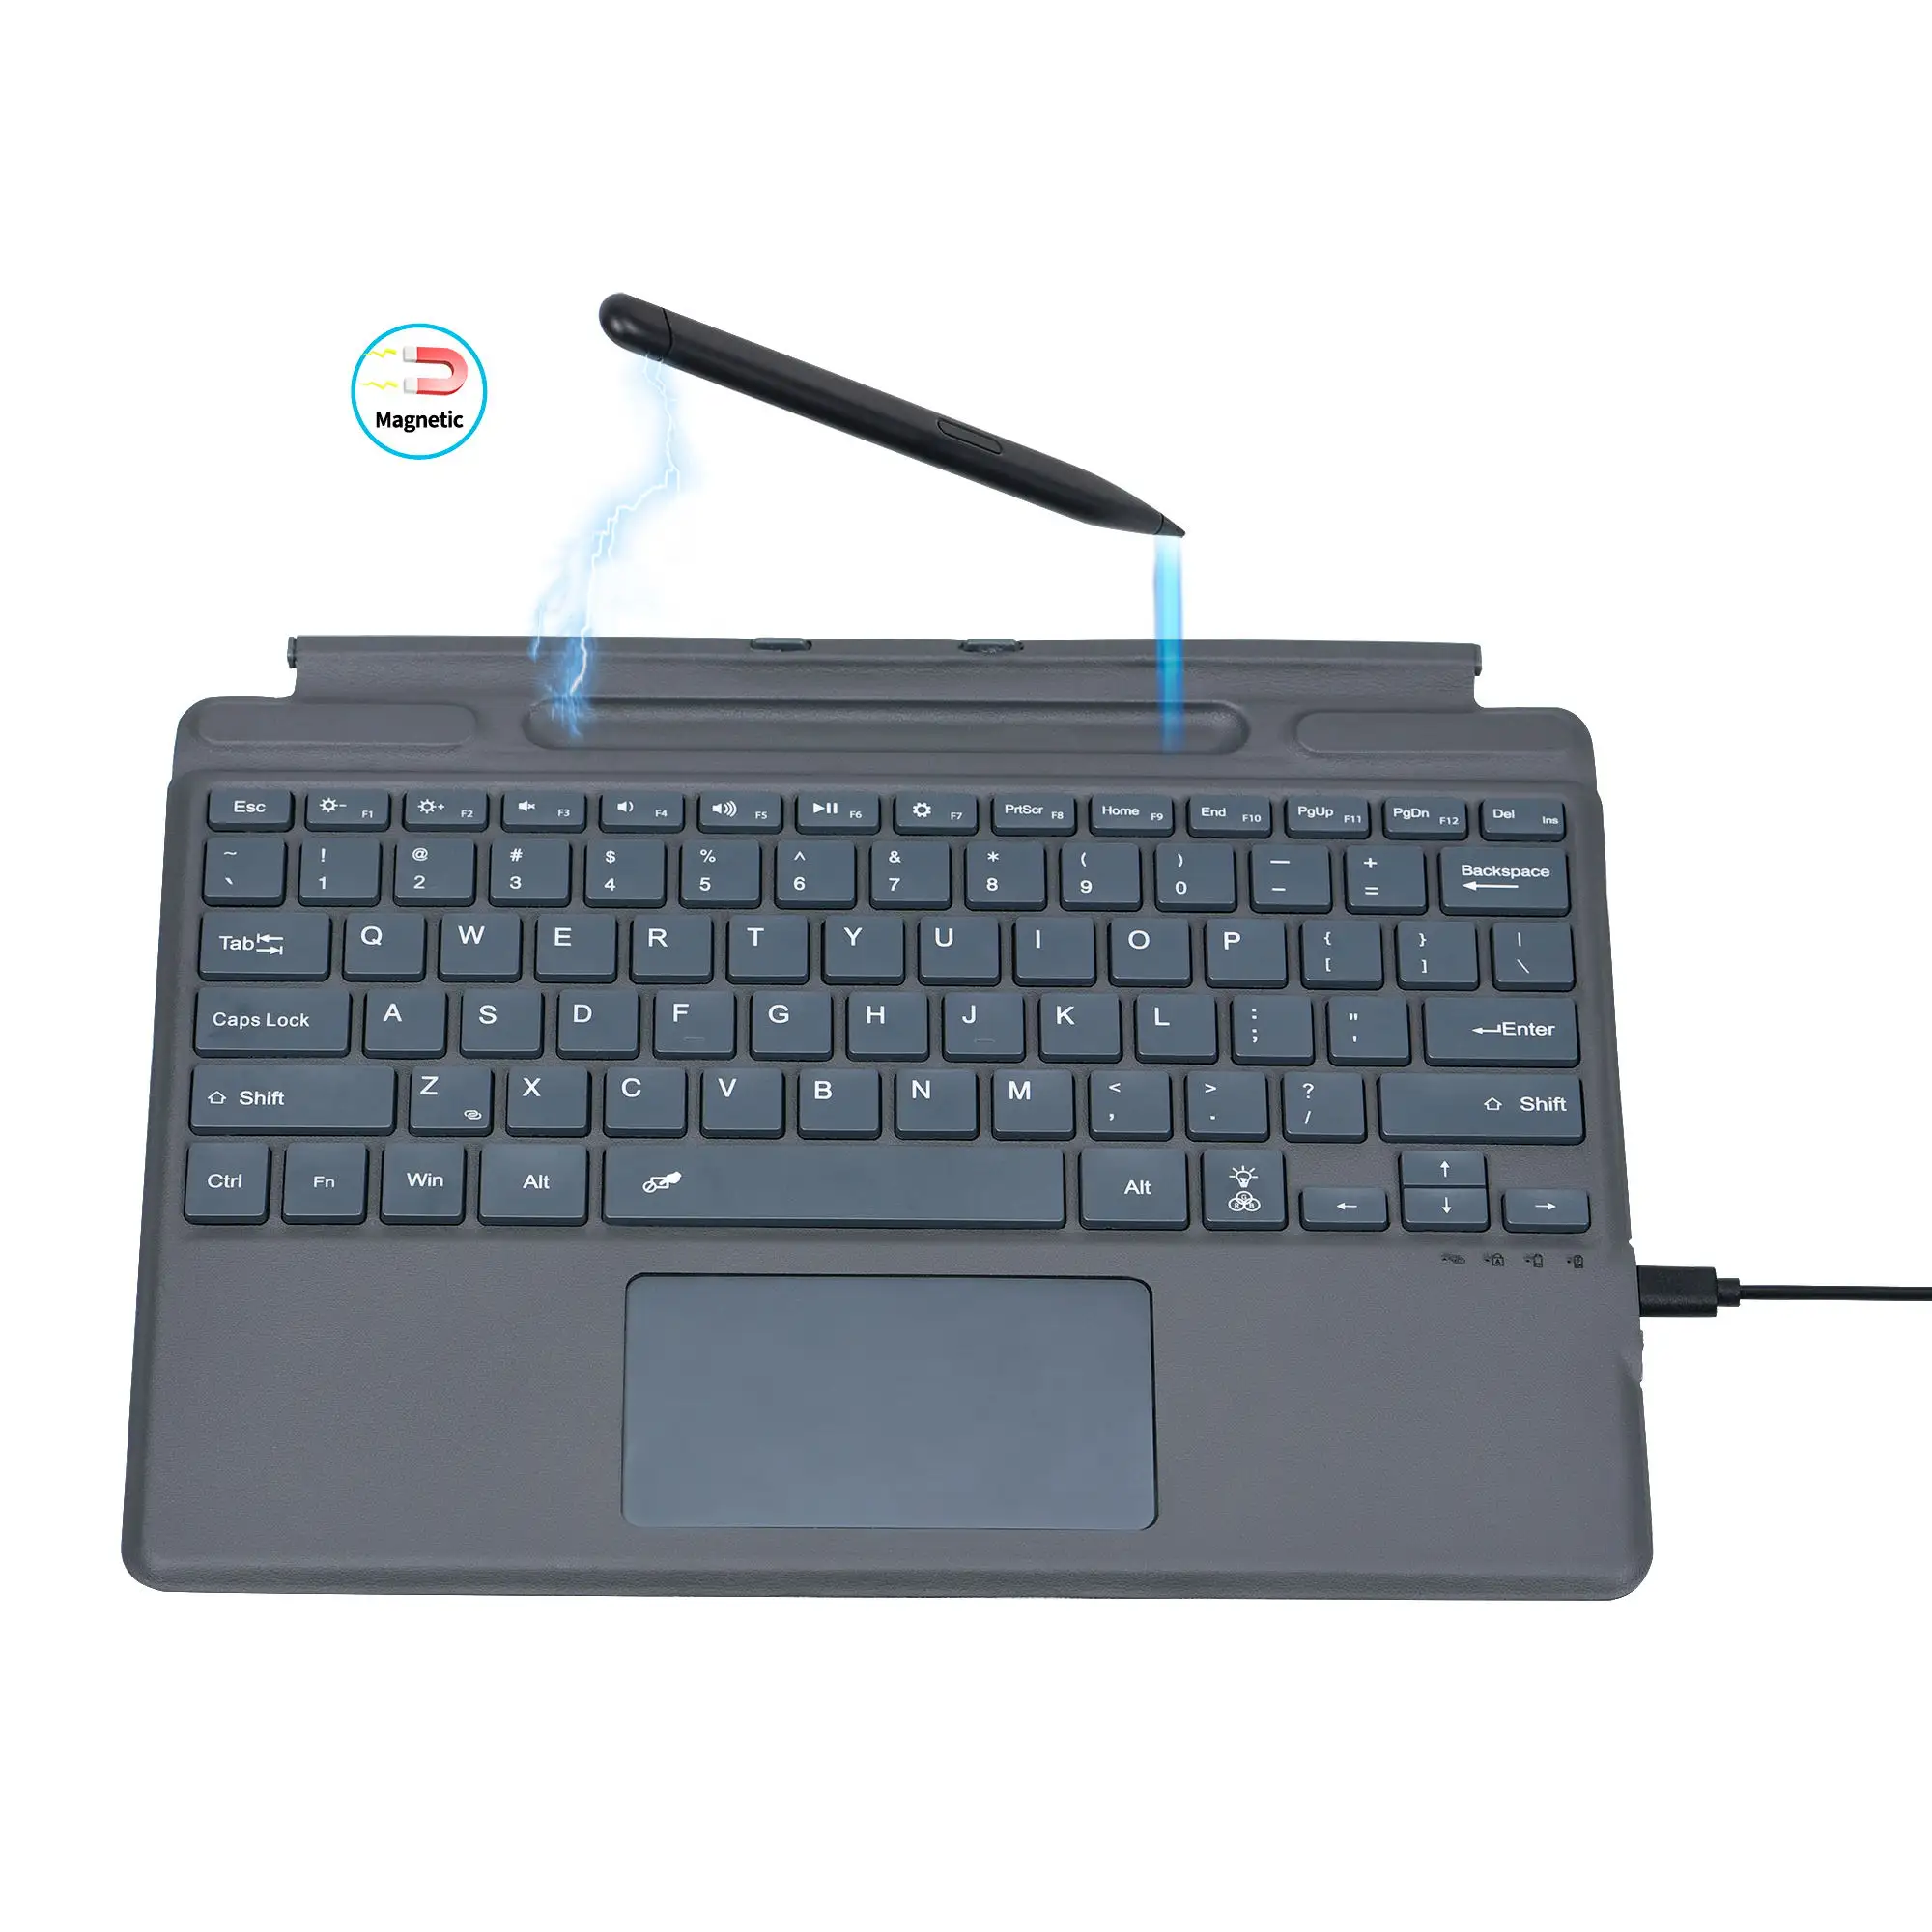 Keyboard for surface pro 8 13" Multi-functional touch pad Smart keyboard cover case for Microsoft Laptop keyboard